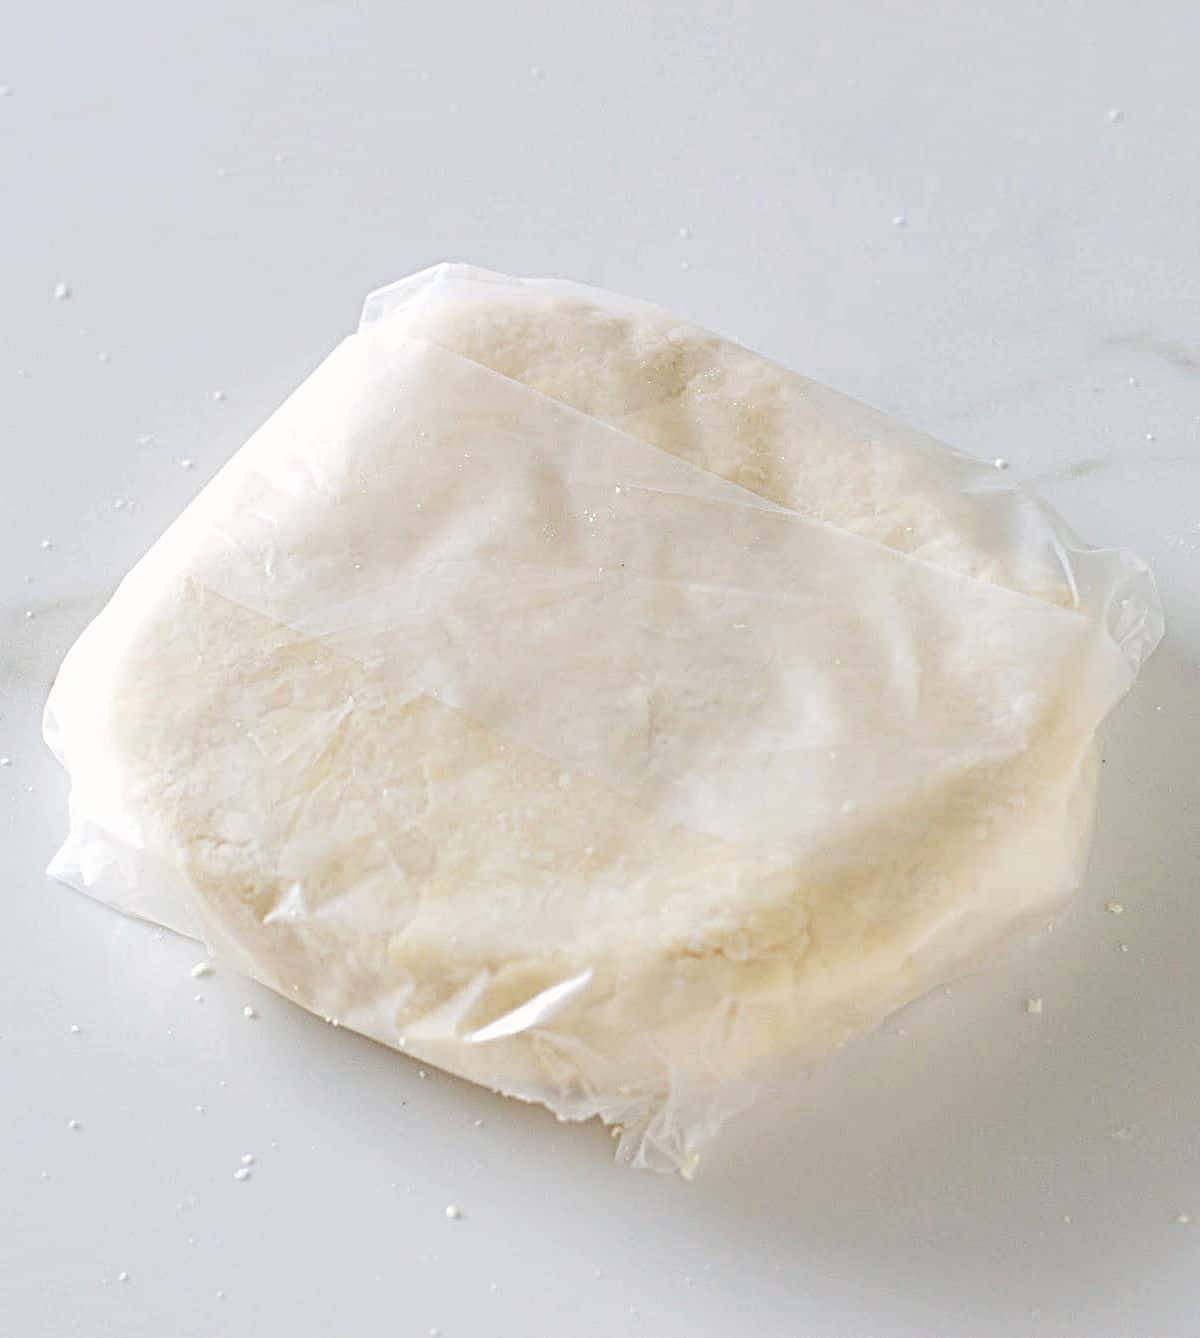 Disc of pie crust wrapped in plastic on white surface